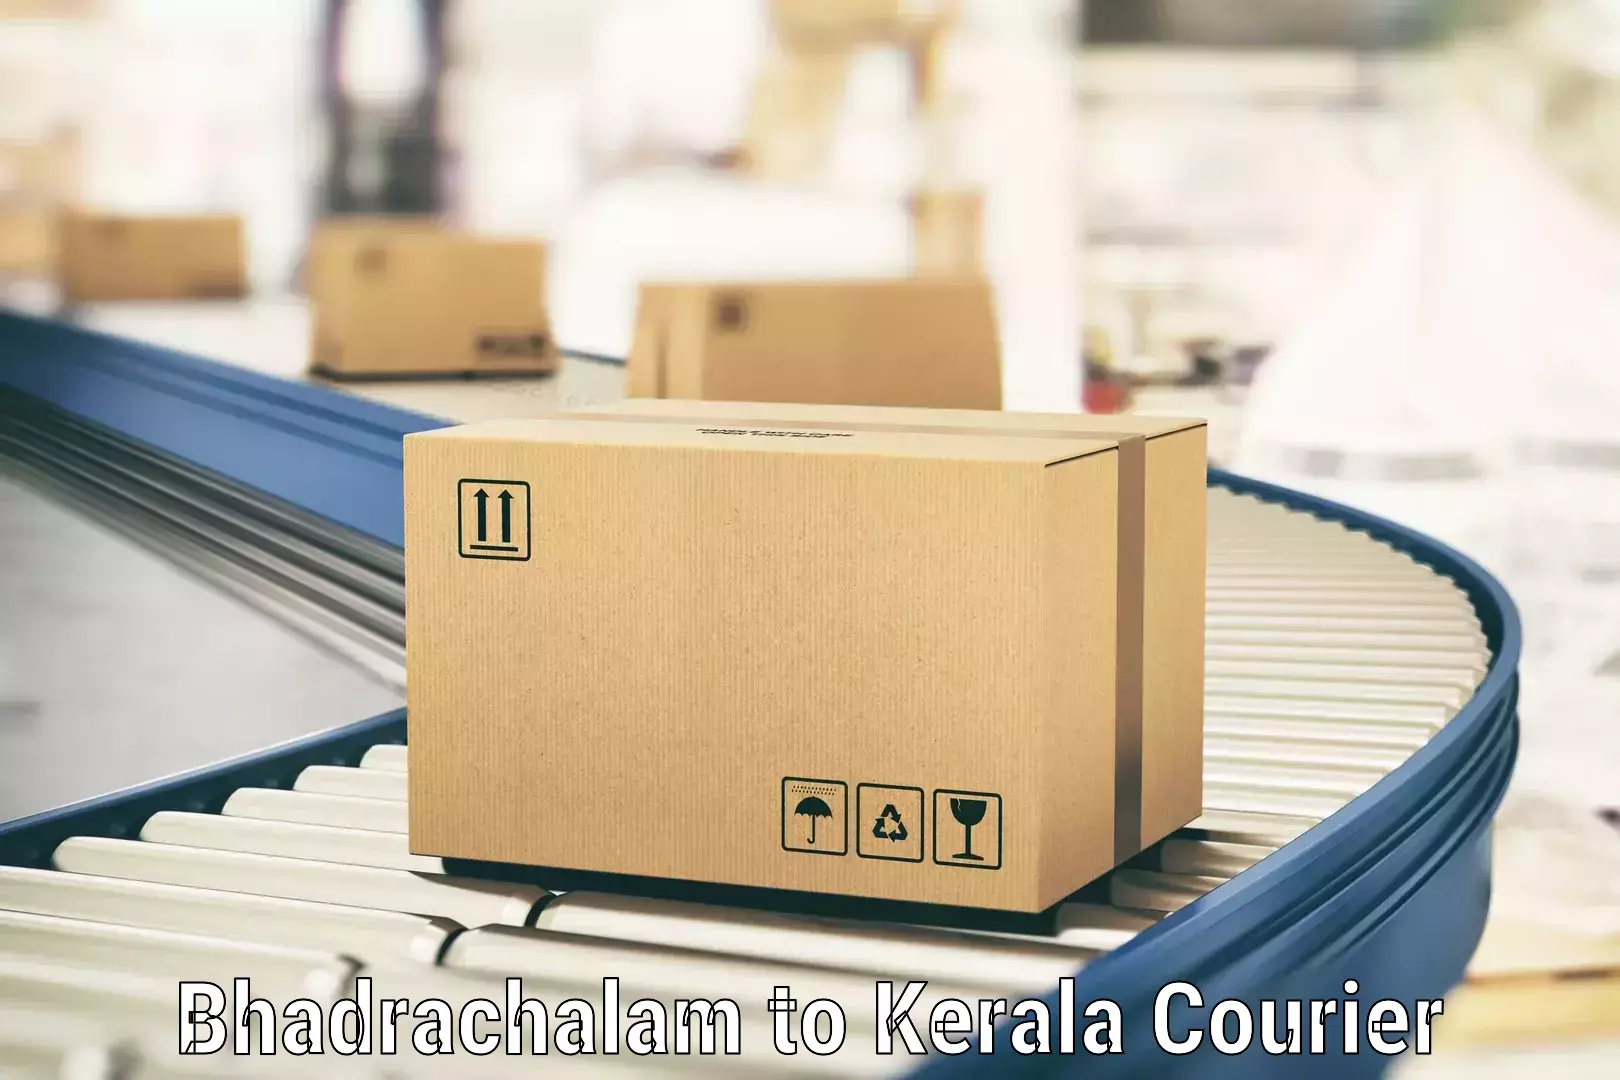 High-quality delivery services Bhadrachalam to Alathur Malabar